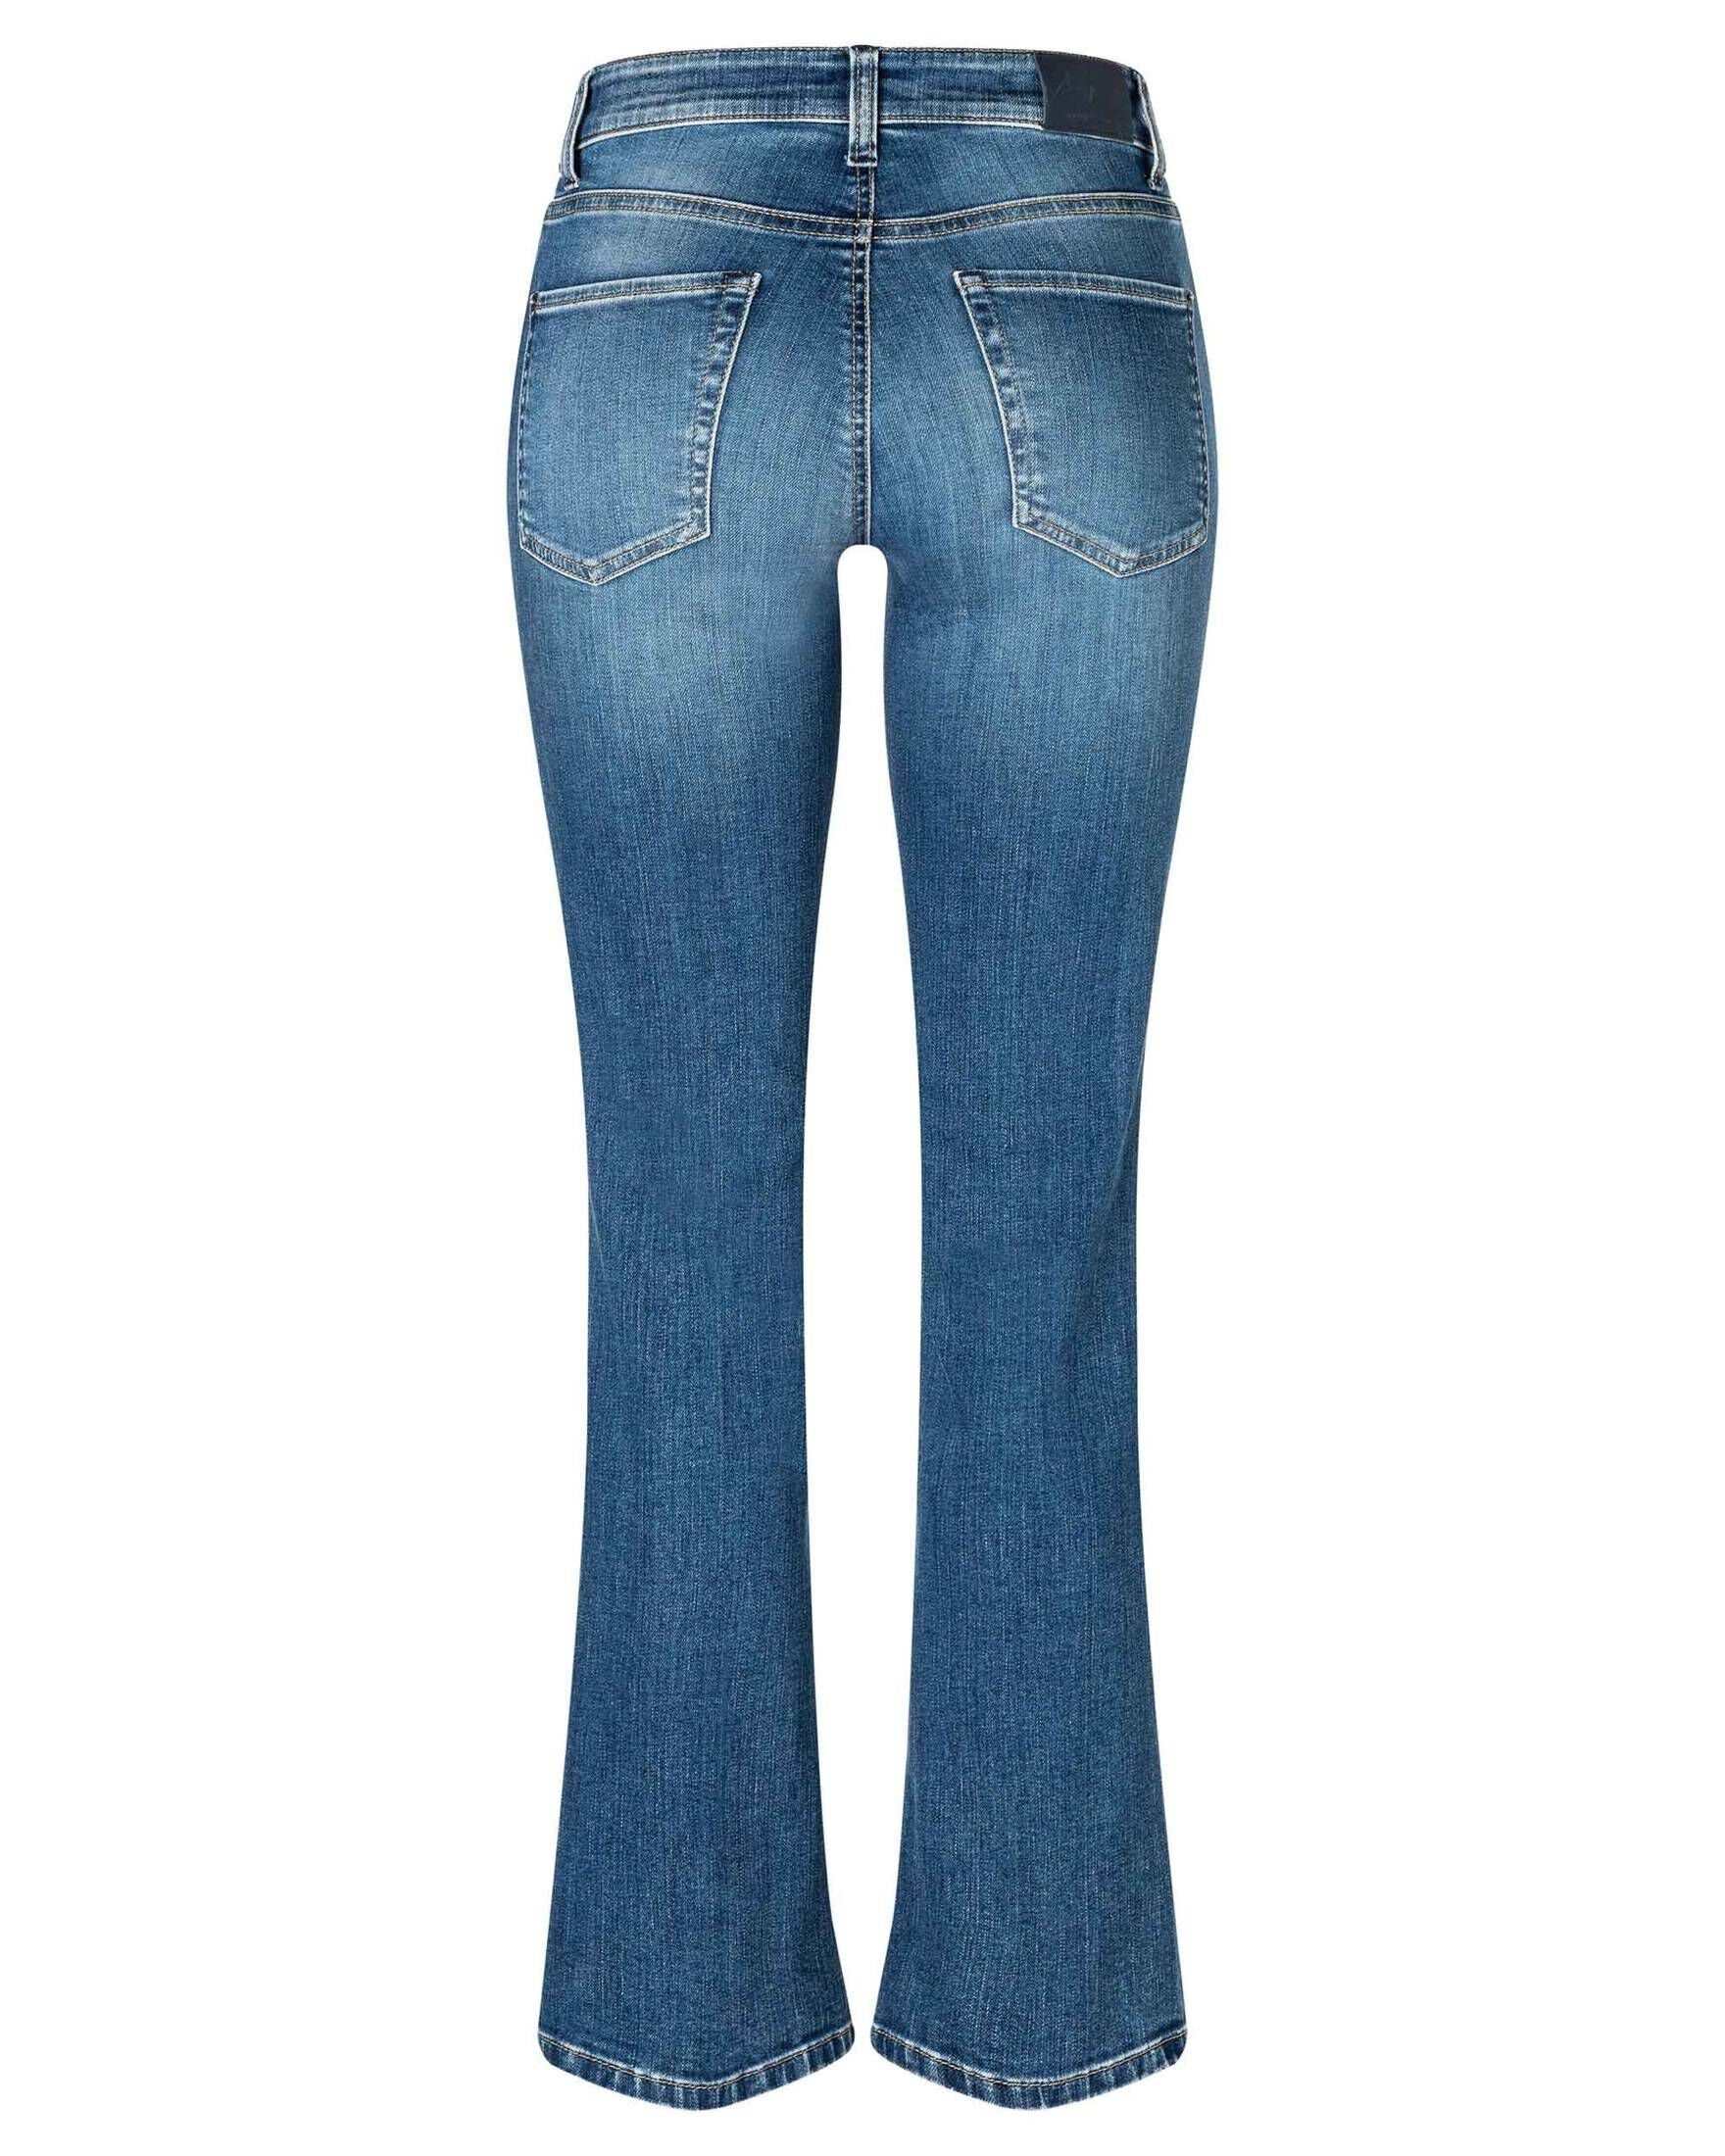 Bootcutjeans Damen Cambio (1-tlg) 5-Pocket-Jeans